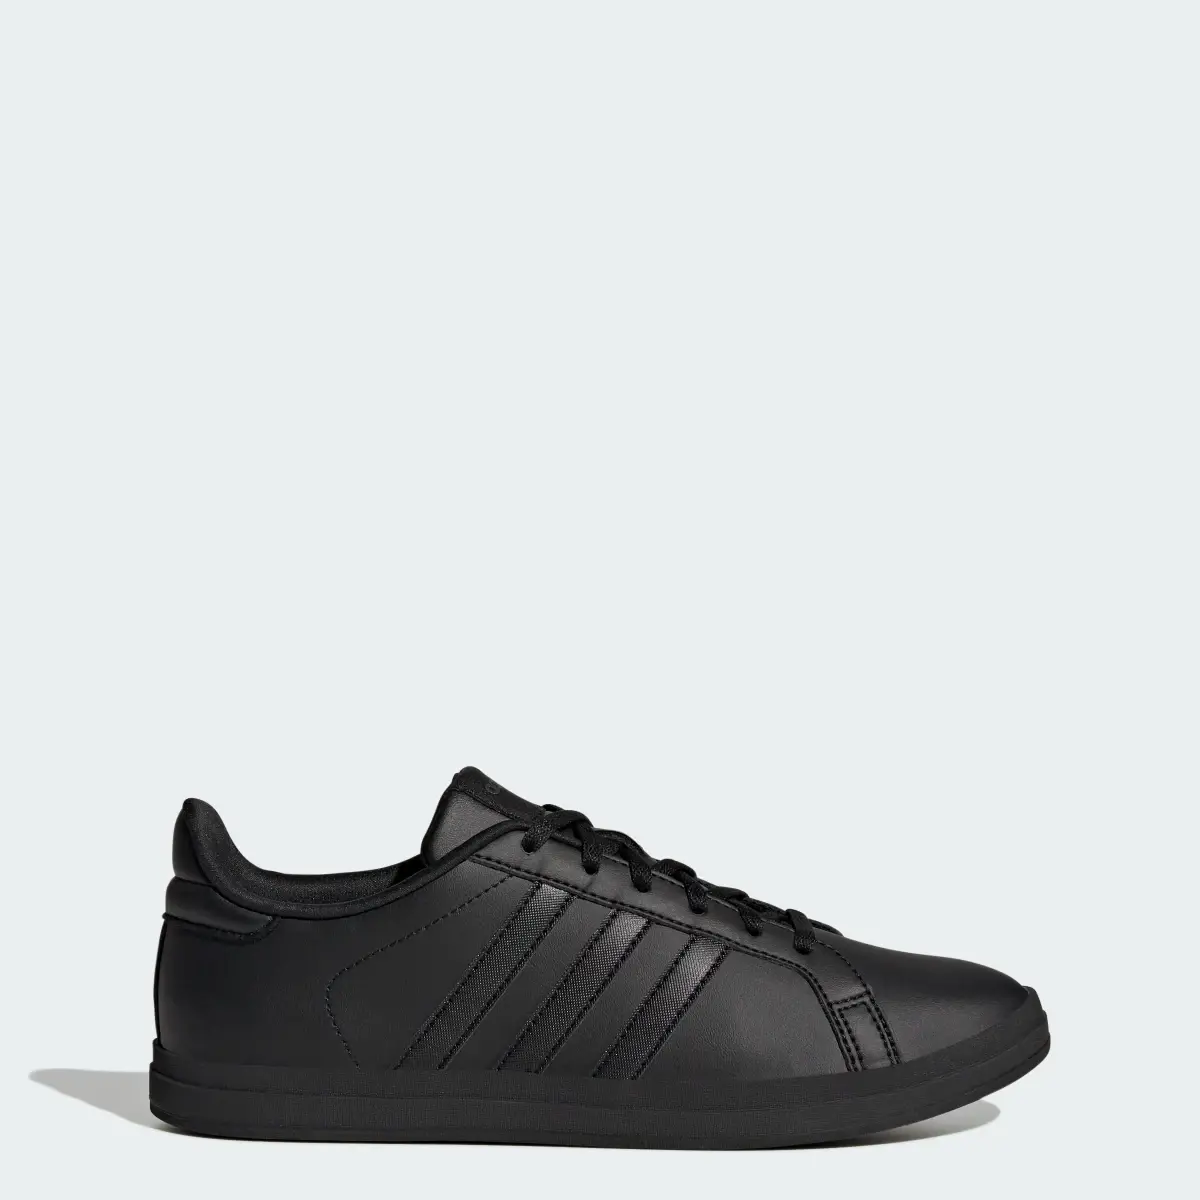 Adidas Courtpoint X Shoes. 1